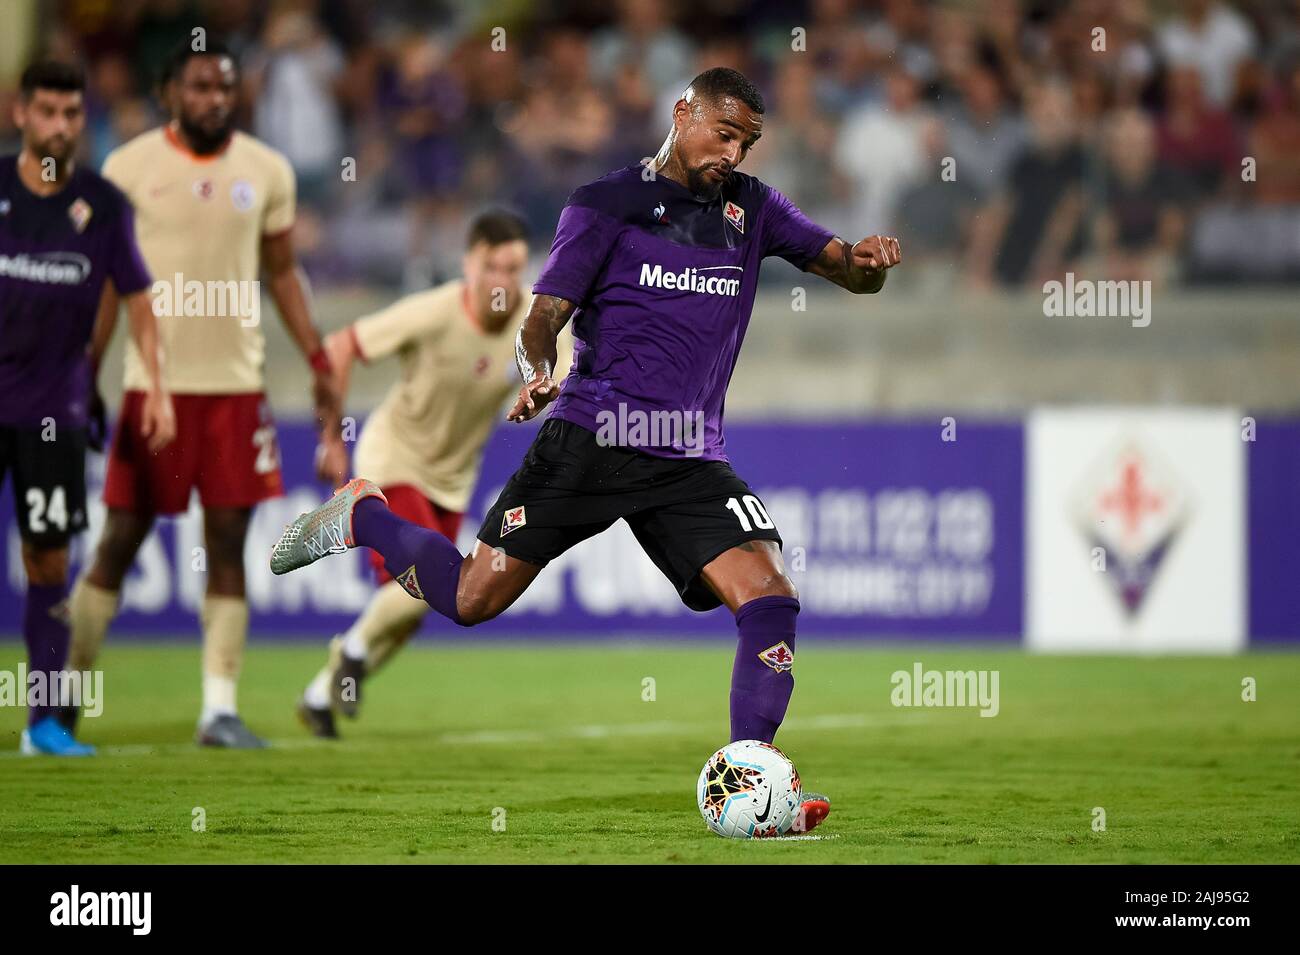 Florence, Italy. 11 August, 2019: Kevin-Prince Boateng of ACF Fiorentina scores the opening goal during the pre-season friendly football match between ACF Fiorentina and Galatasaray SK. ACF Fiorentina won 4-1 over Galatasaray SK. Credit: Nicolò Campo/Alamy Live News Stock Photo